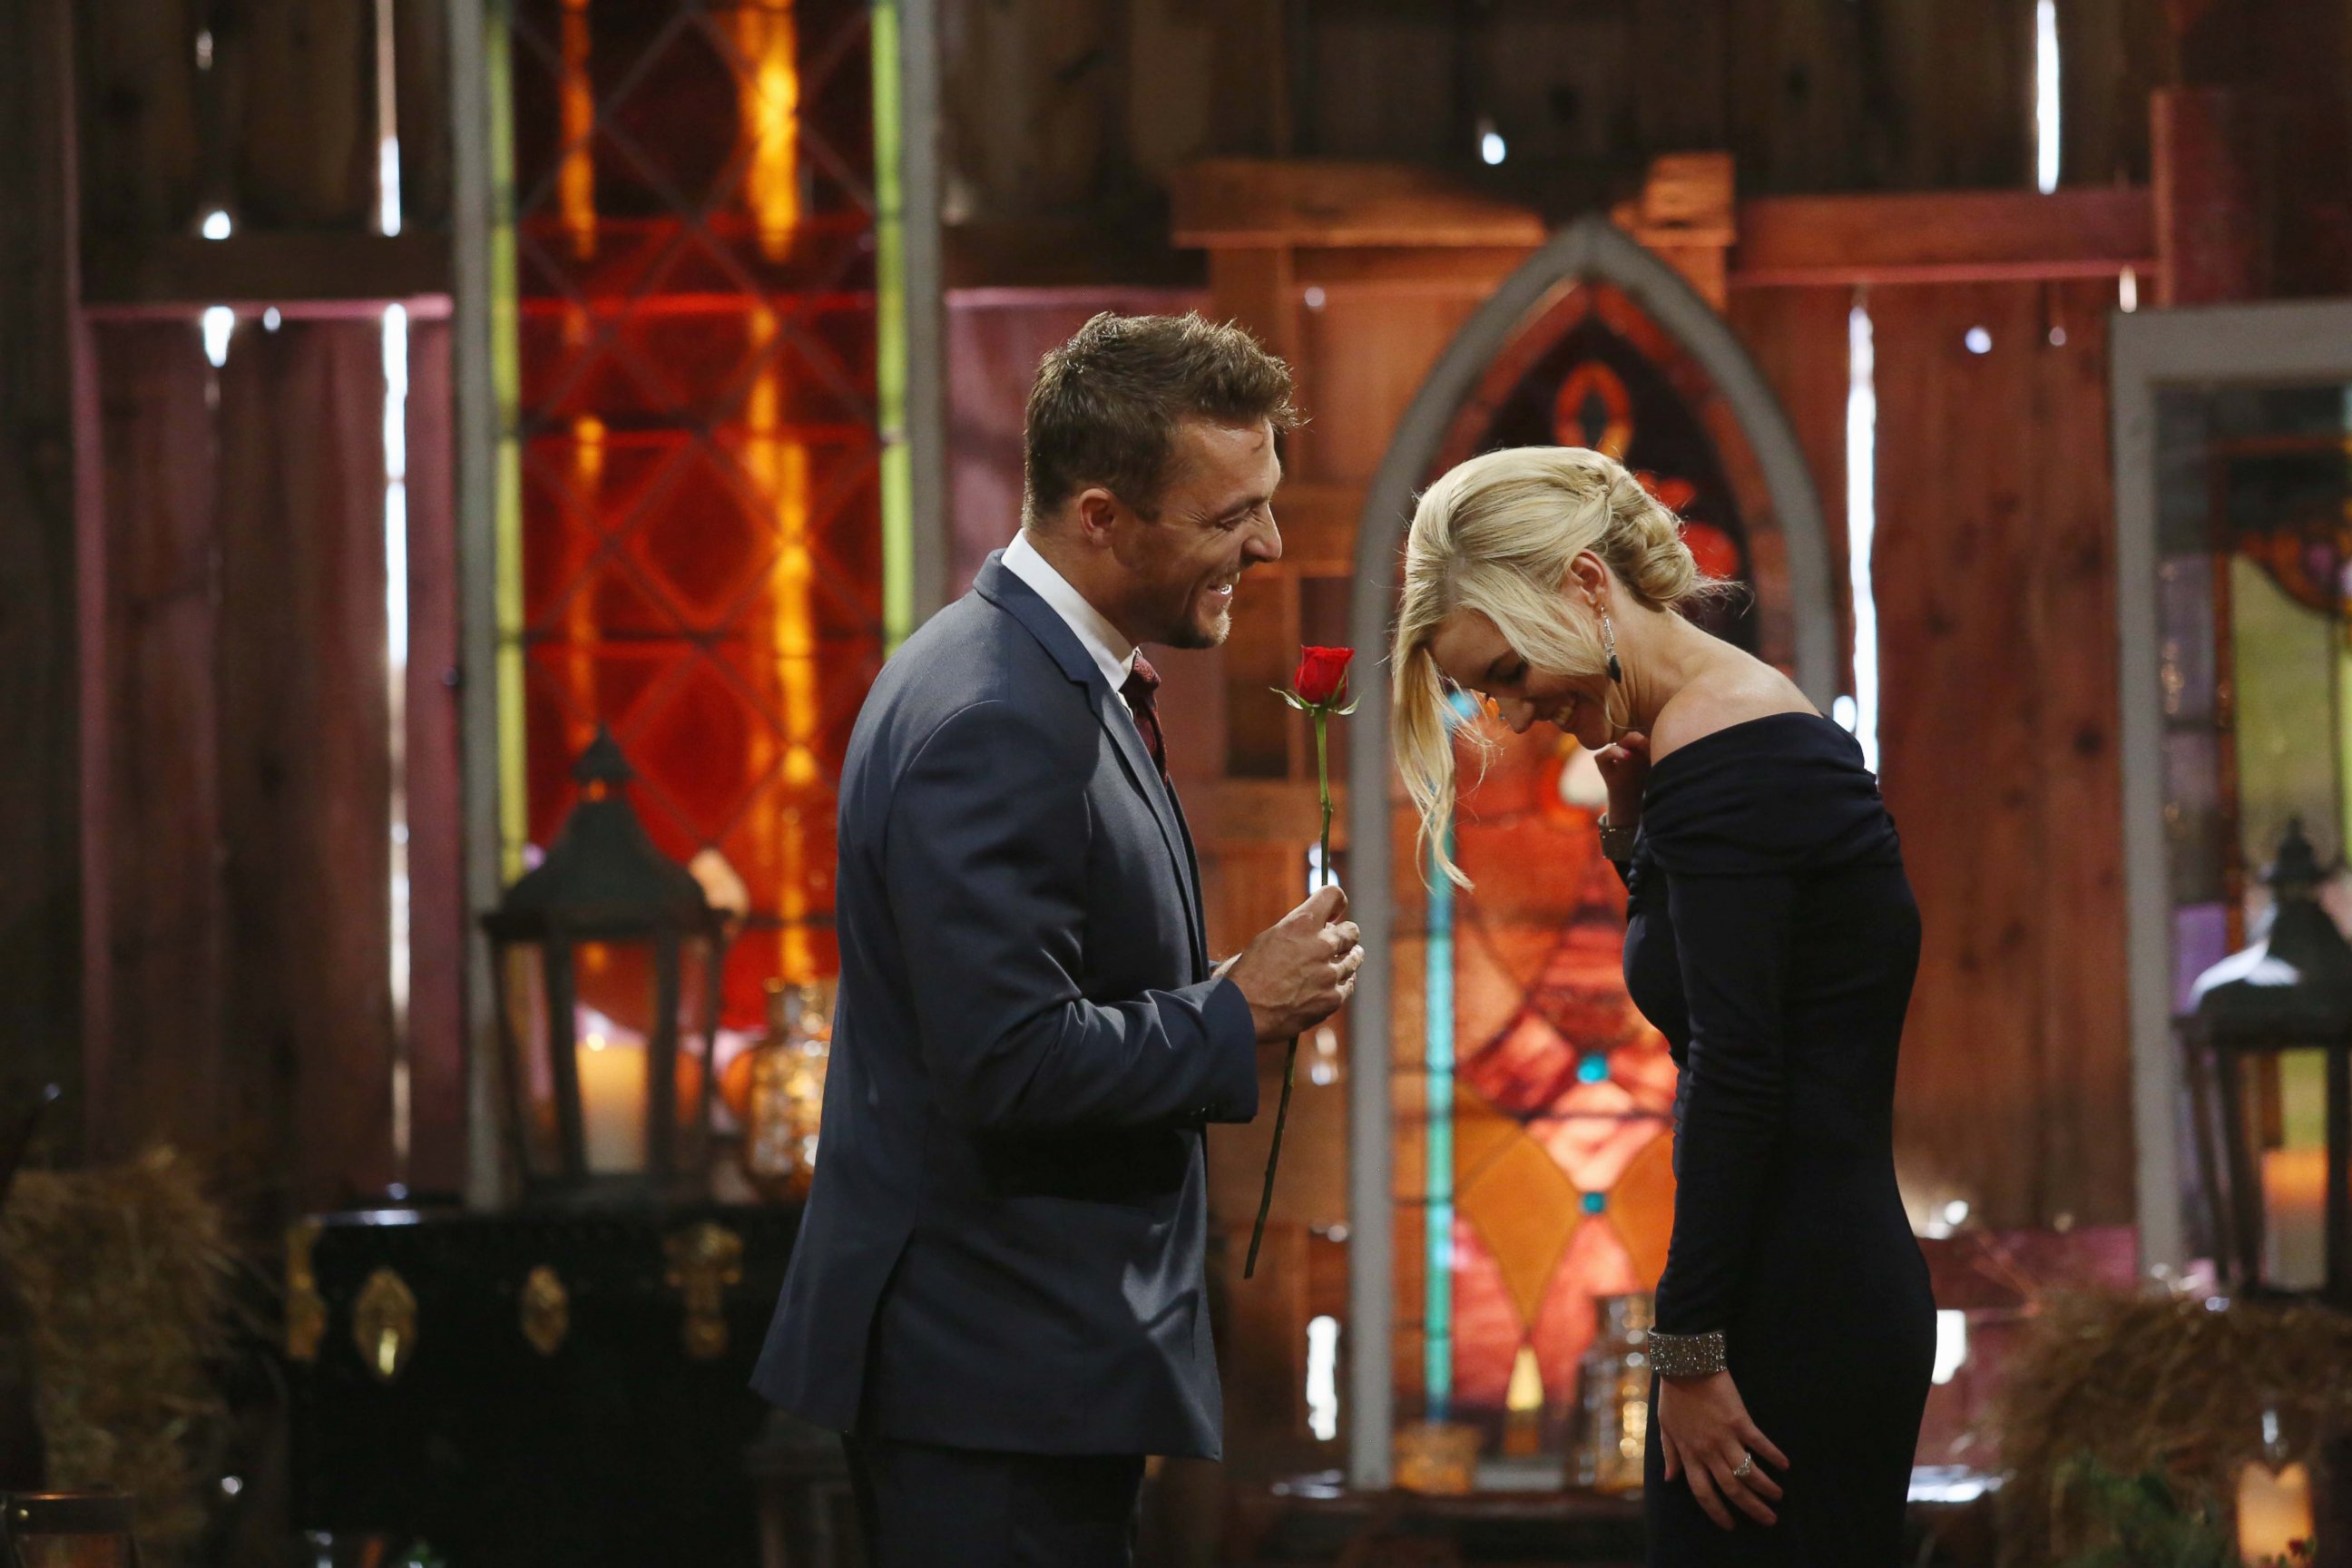 PHOTO: Chris Soules proposed to Whitney Bischoff on the season finale of "The Bachelor"